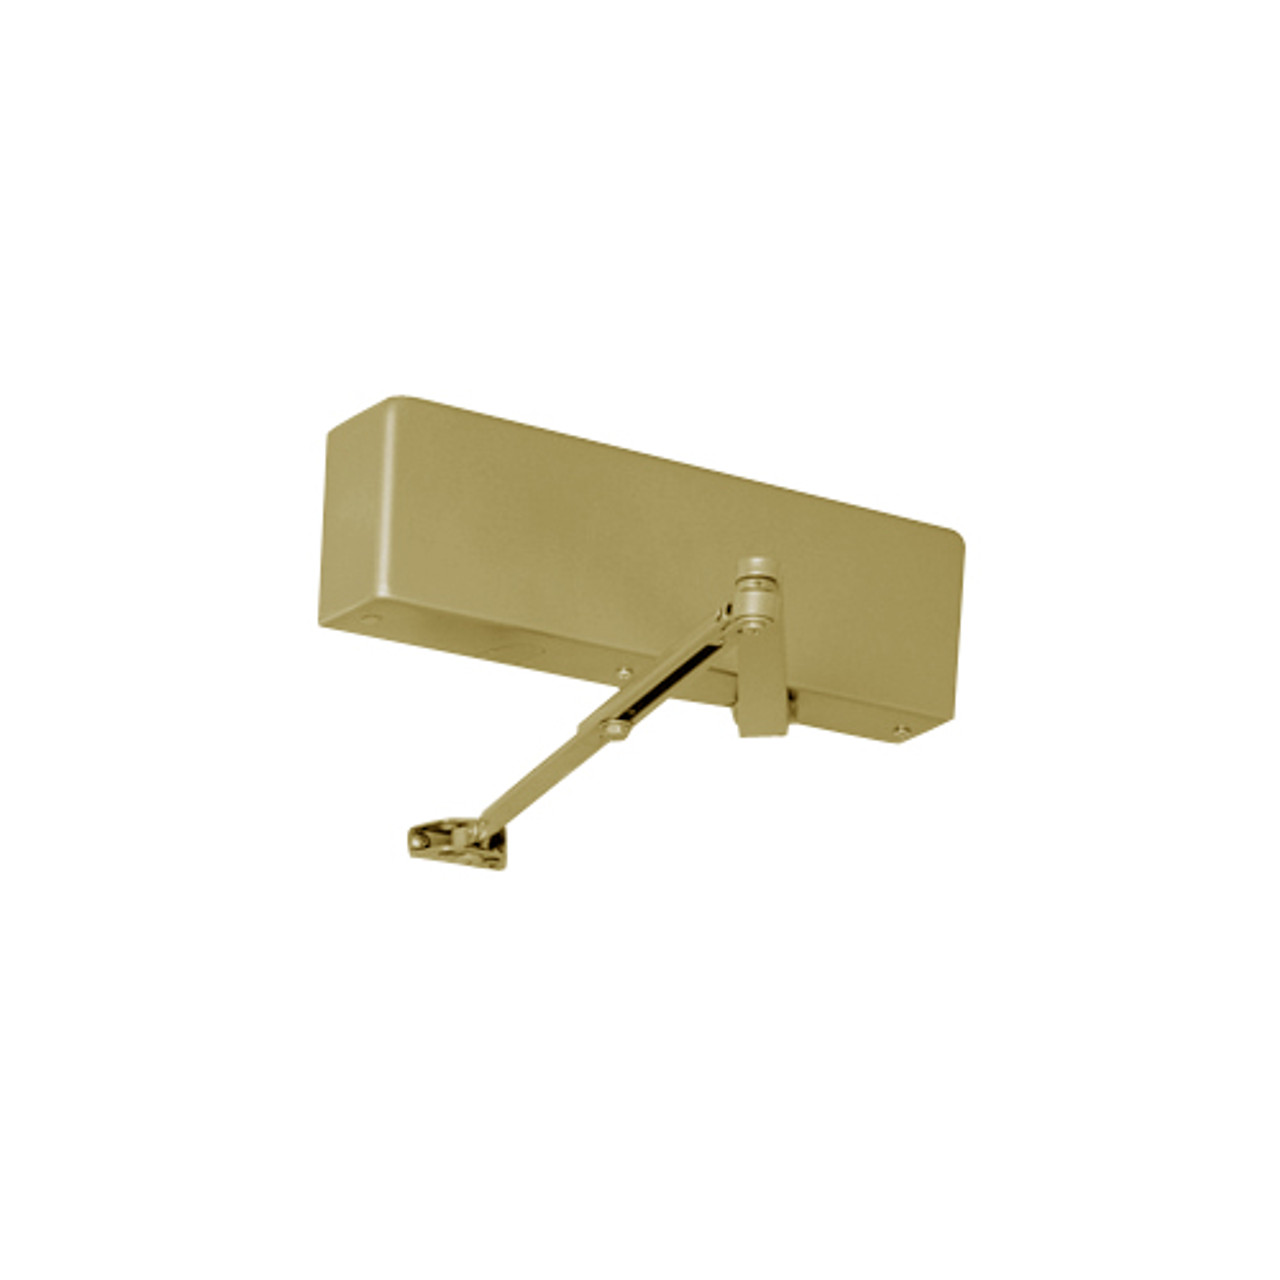 JS7500-696 Norton 7500 Series Non-Hold Open Institutional Door Closer with Top Jamb Application 3 inch Maximum Reveal in Gold Finish